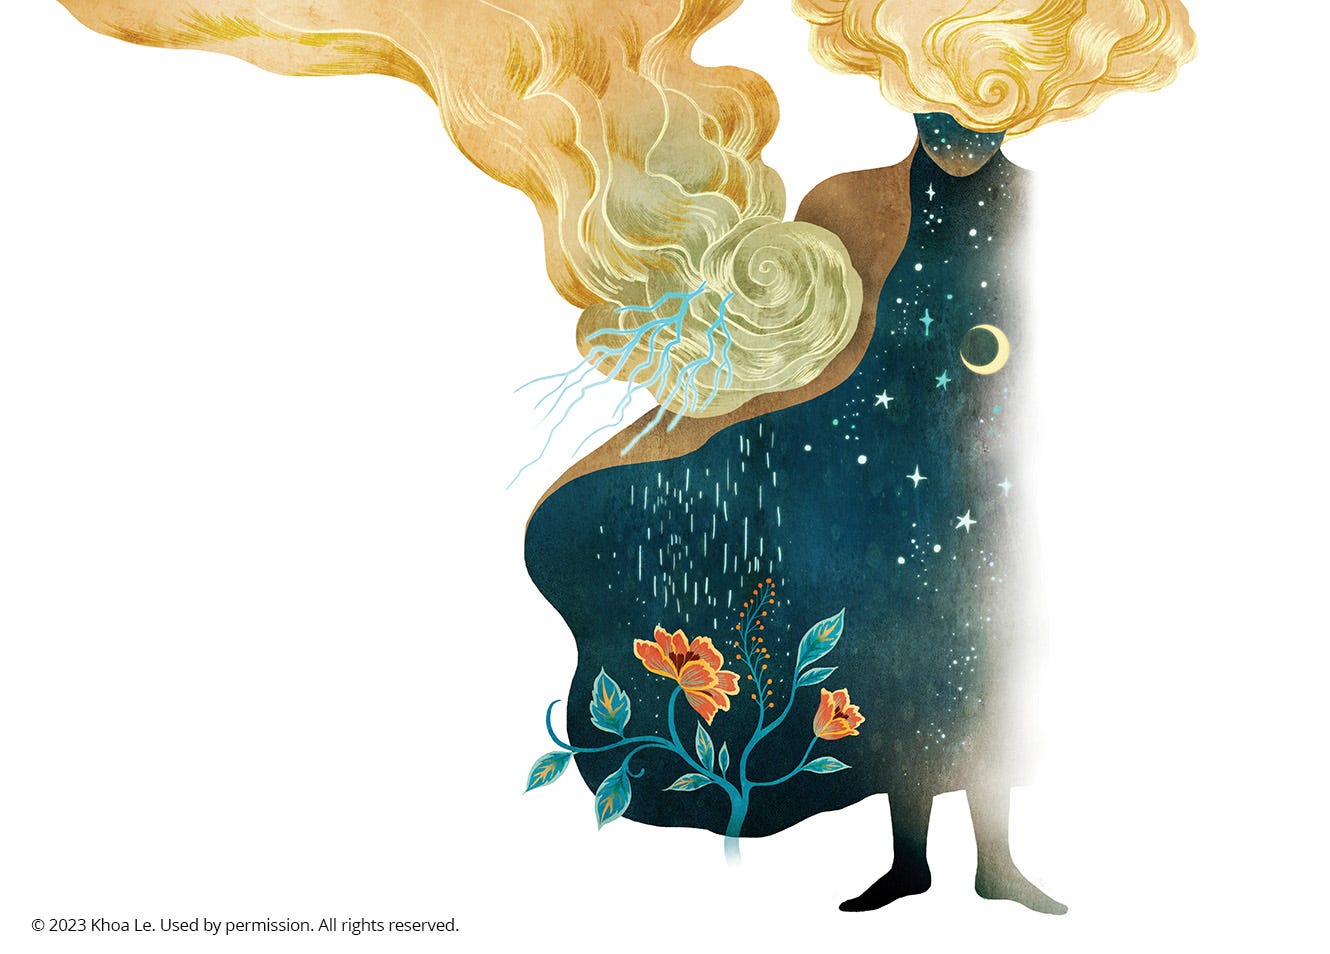 A nebulous figure with a cloak that contains a night sky, rain and flowers, is surrounded by swirling yellow clouds and lightning.